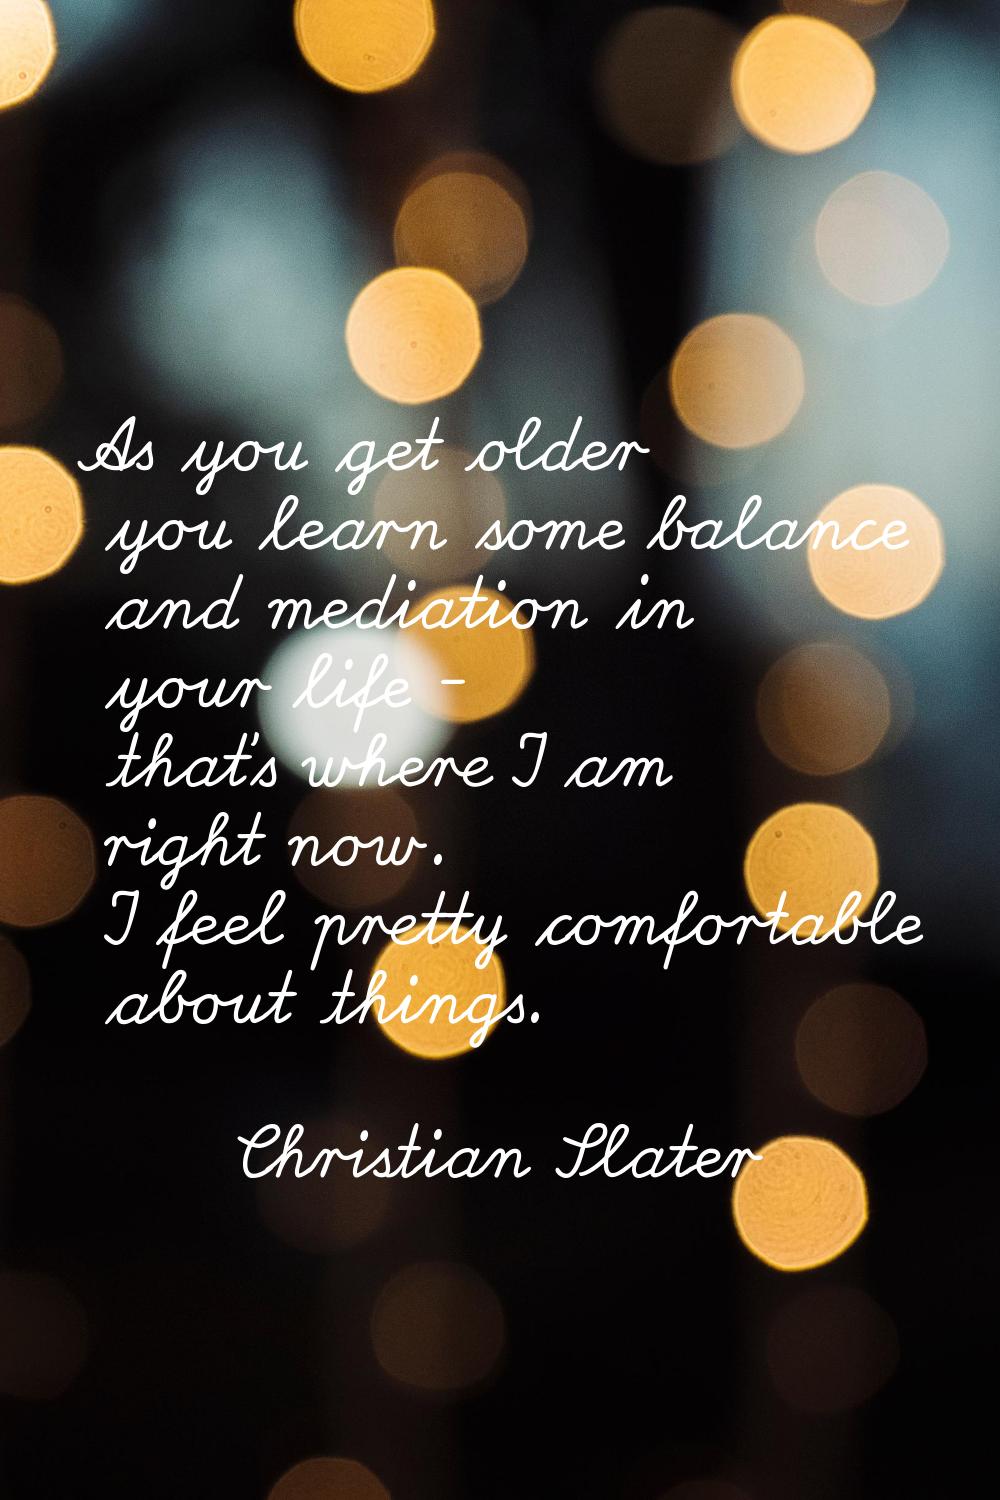 As you get older you learn some balance and mediation in your life - that's where I am right now. I